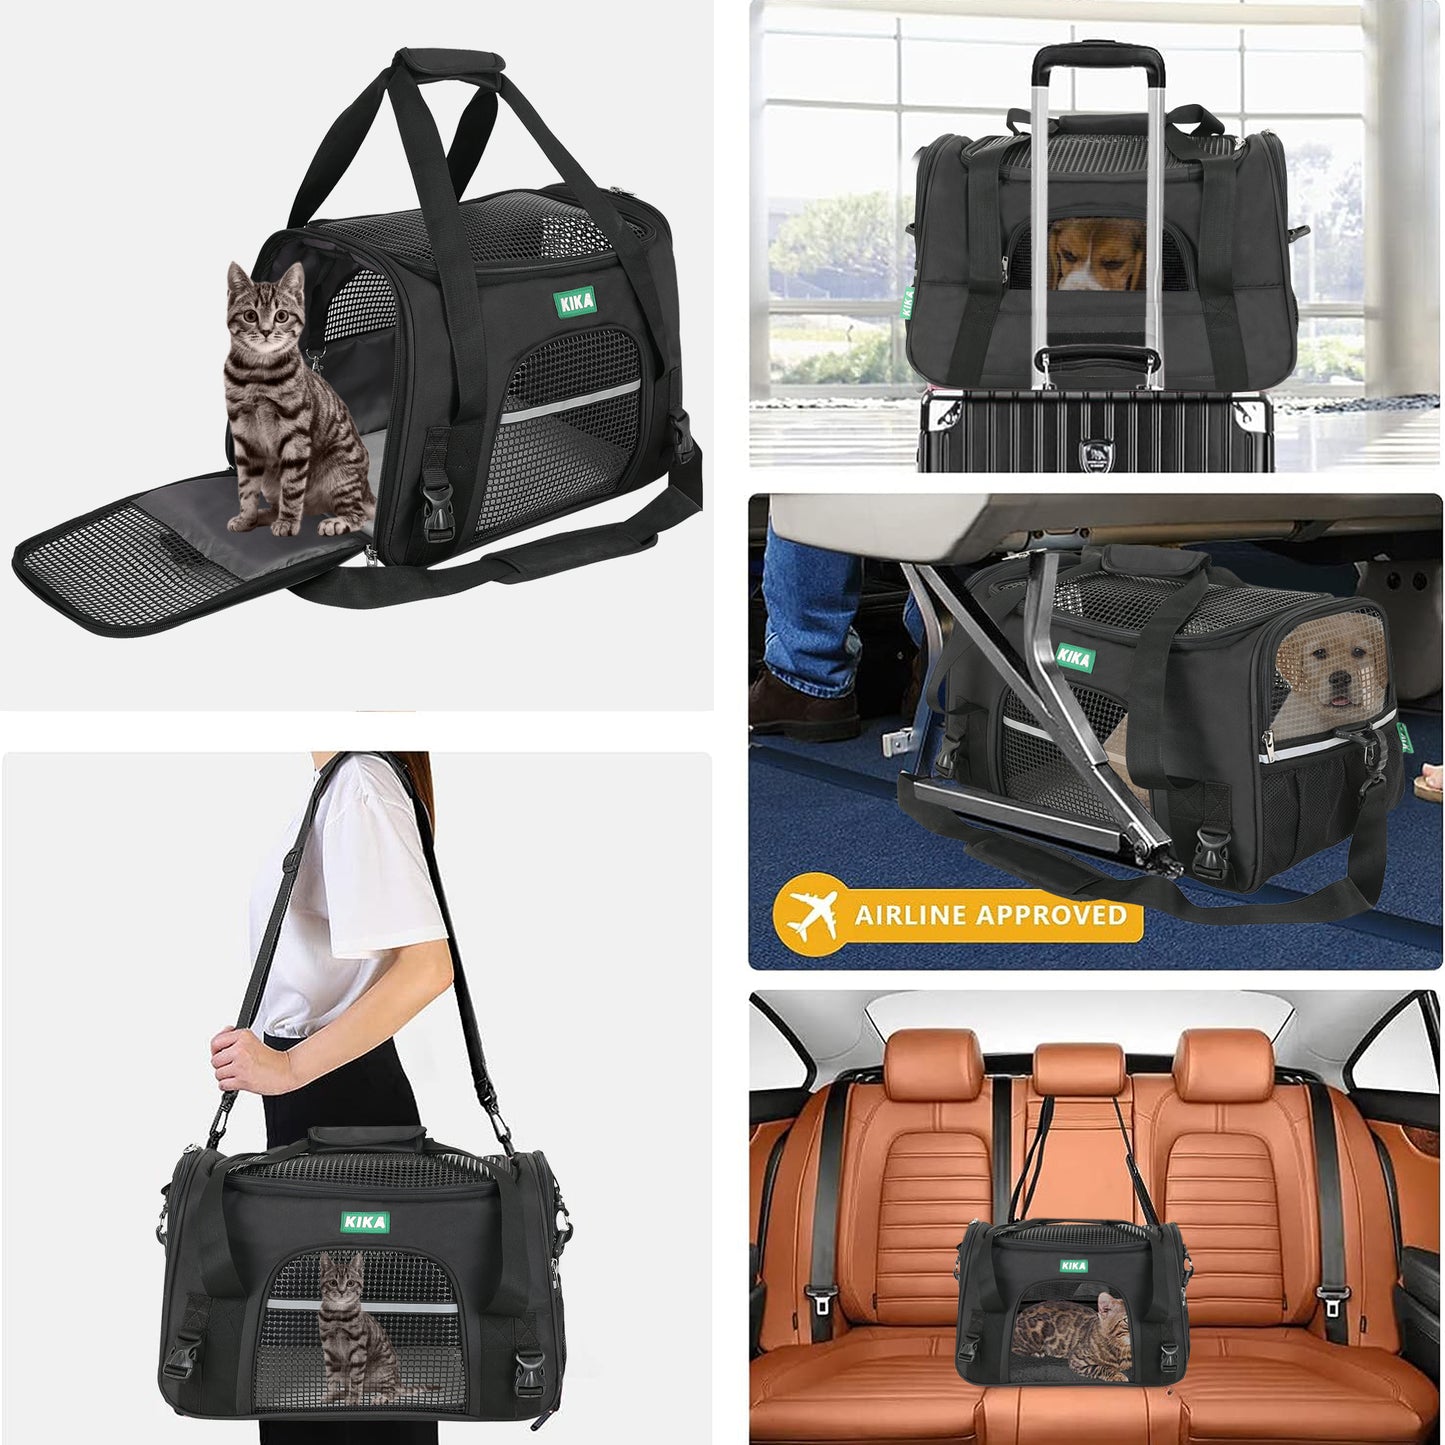 PRO Airline Approved Pets, Puppy and Cat Carrier Bag - KIKA PETS